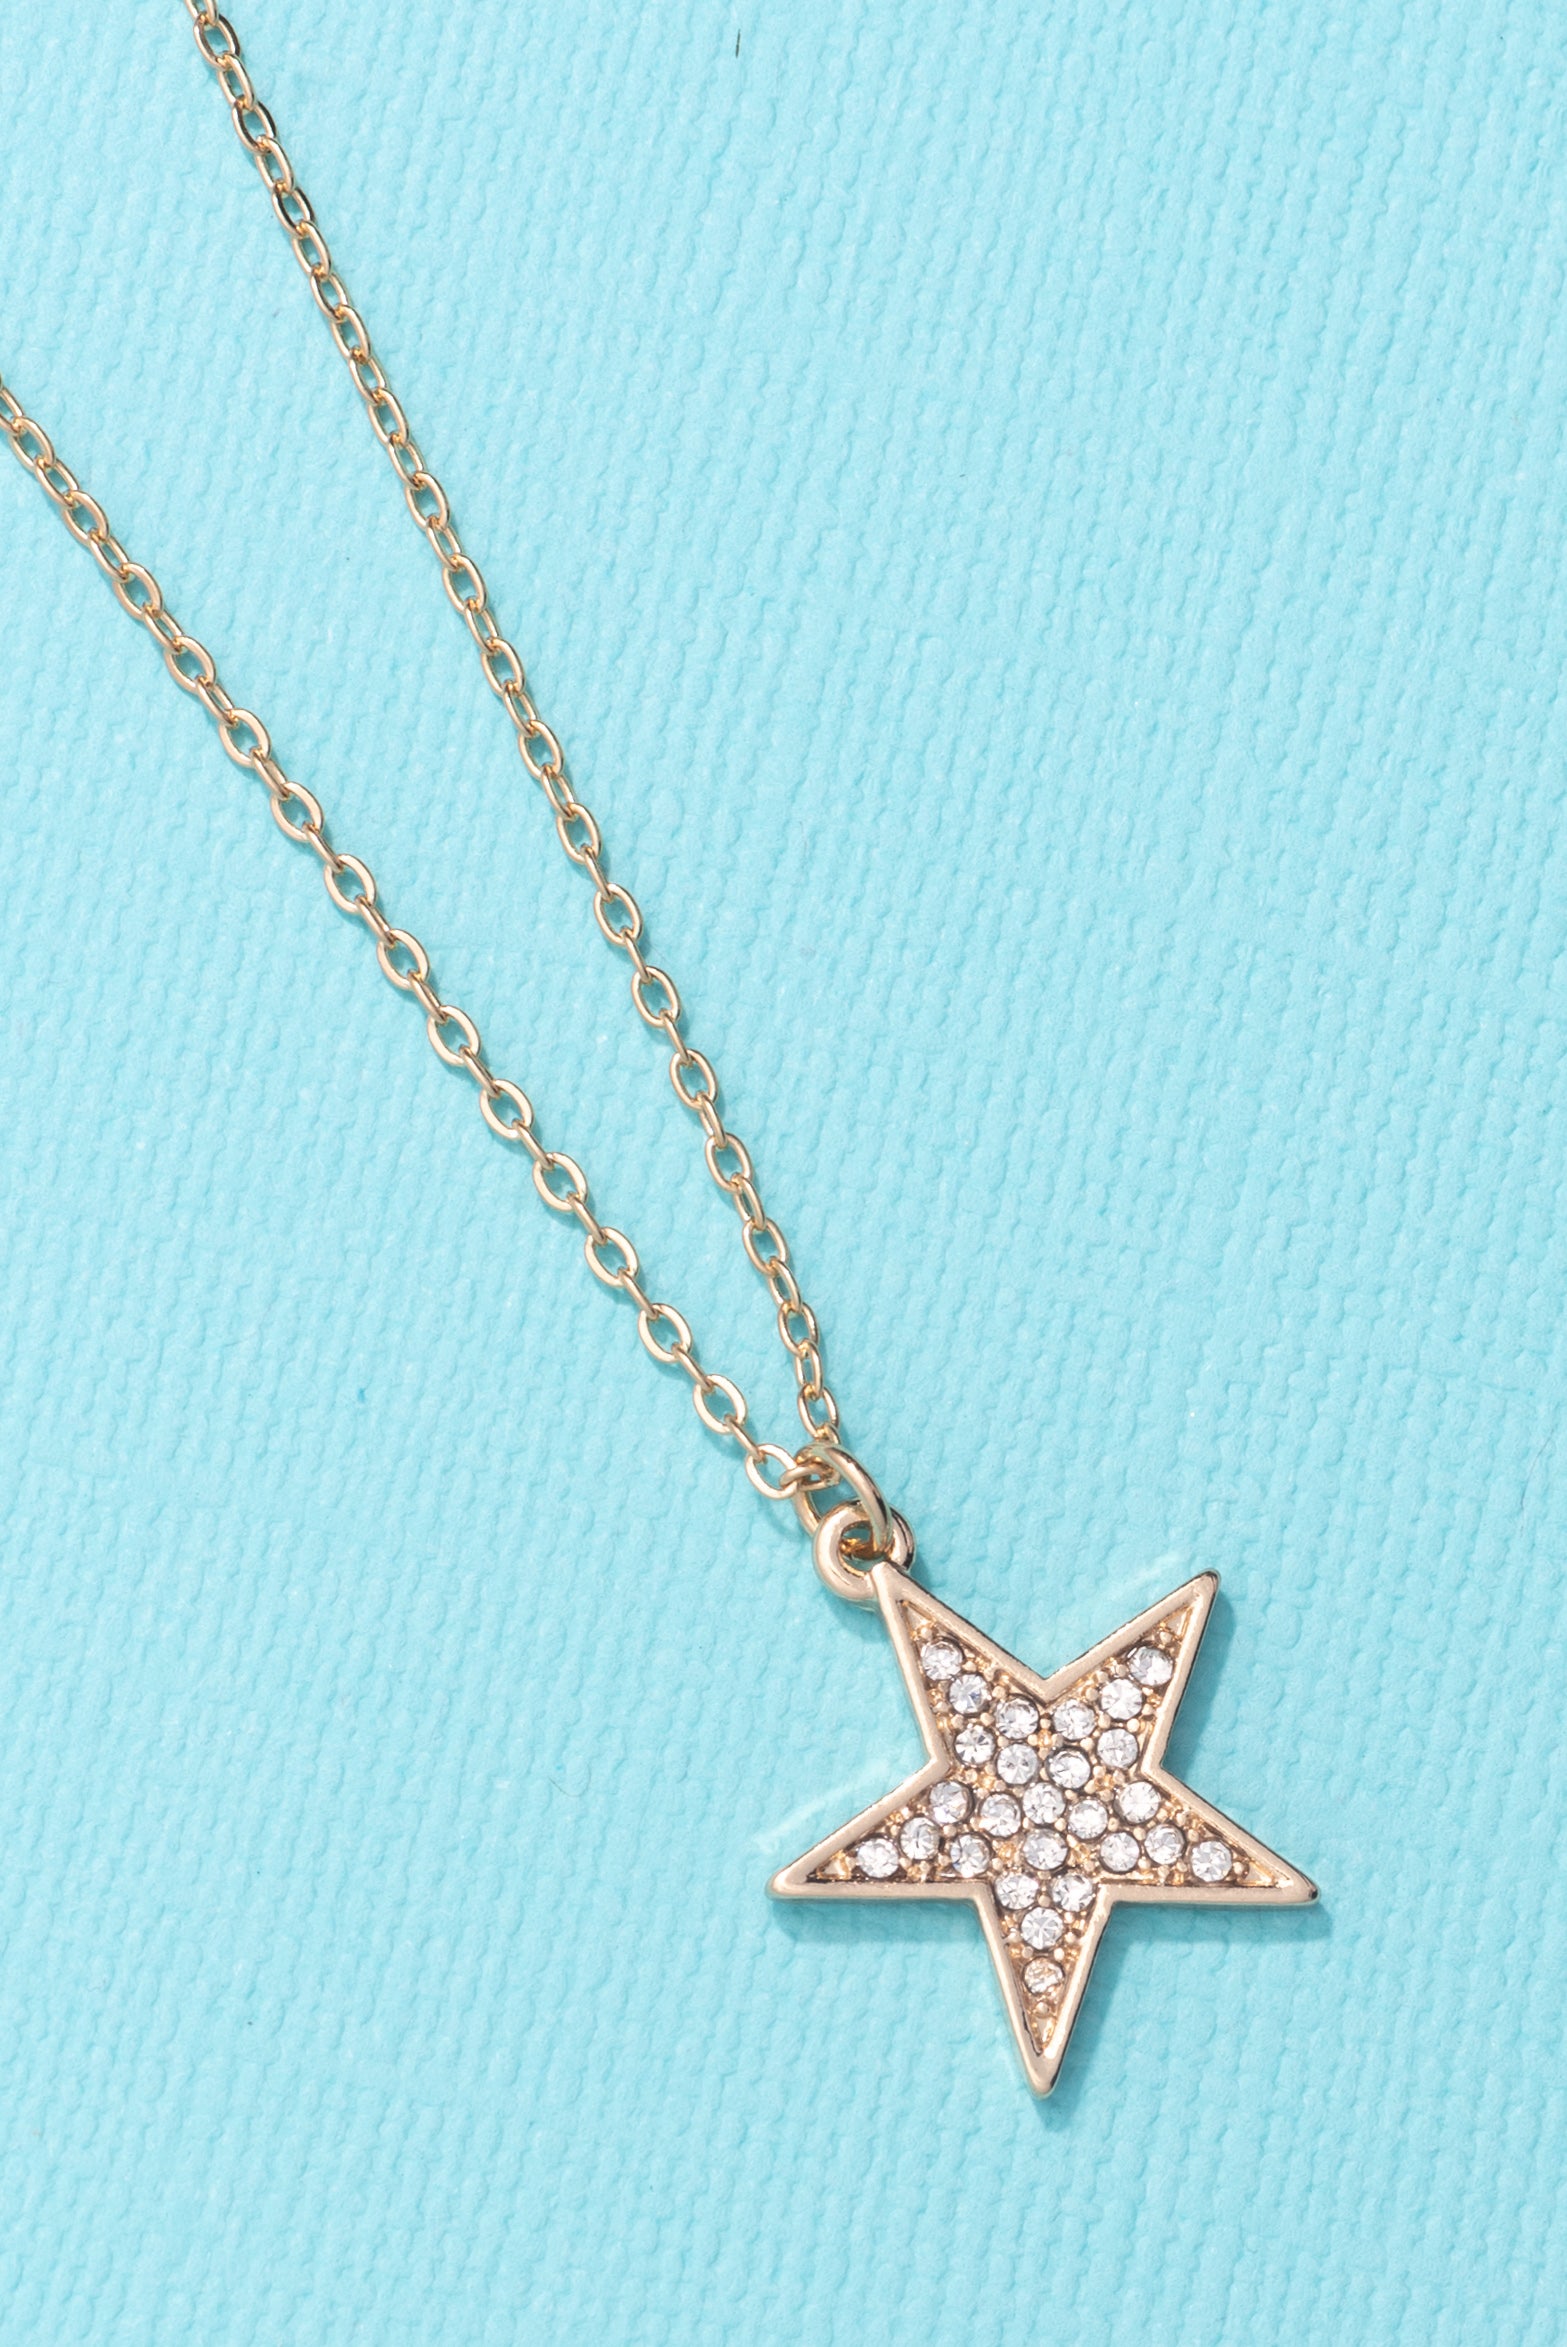 Type 1 Star Quality Necklace